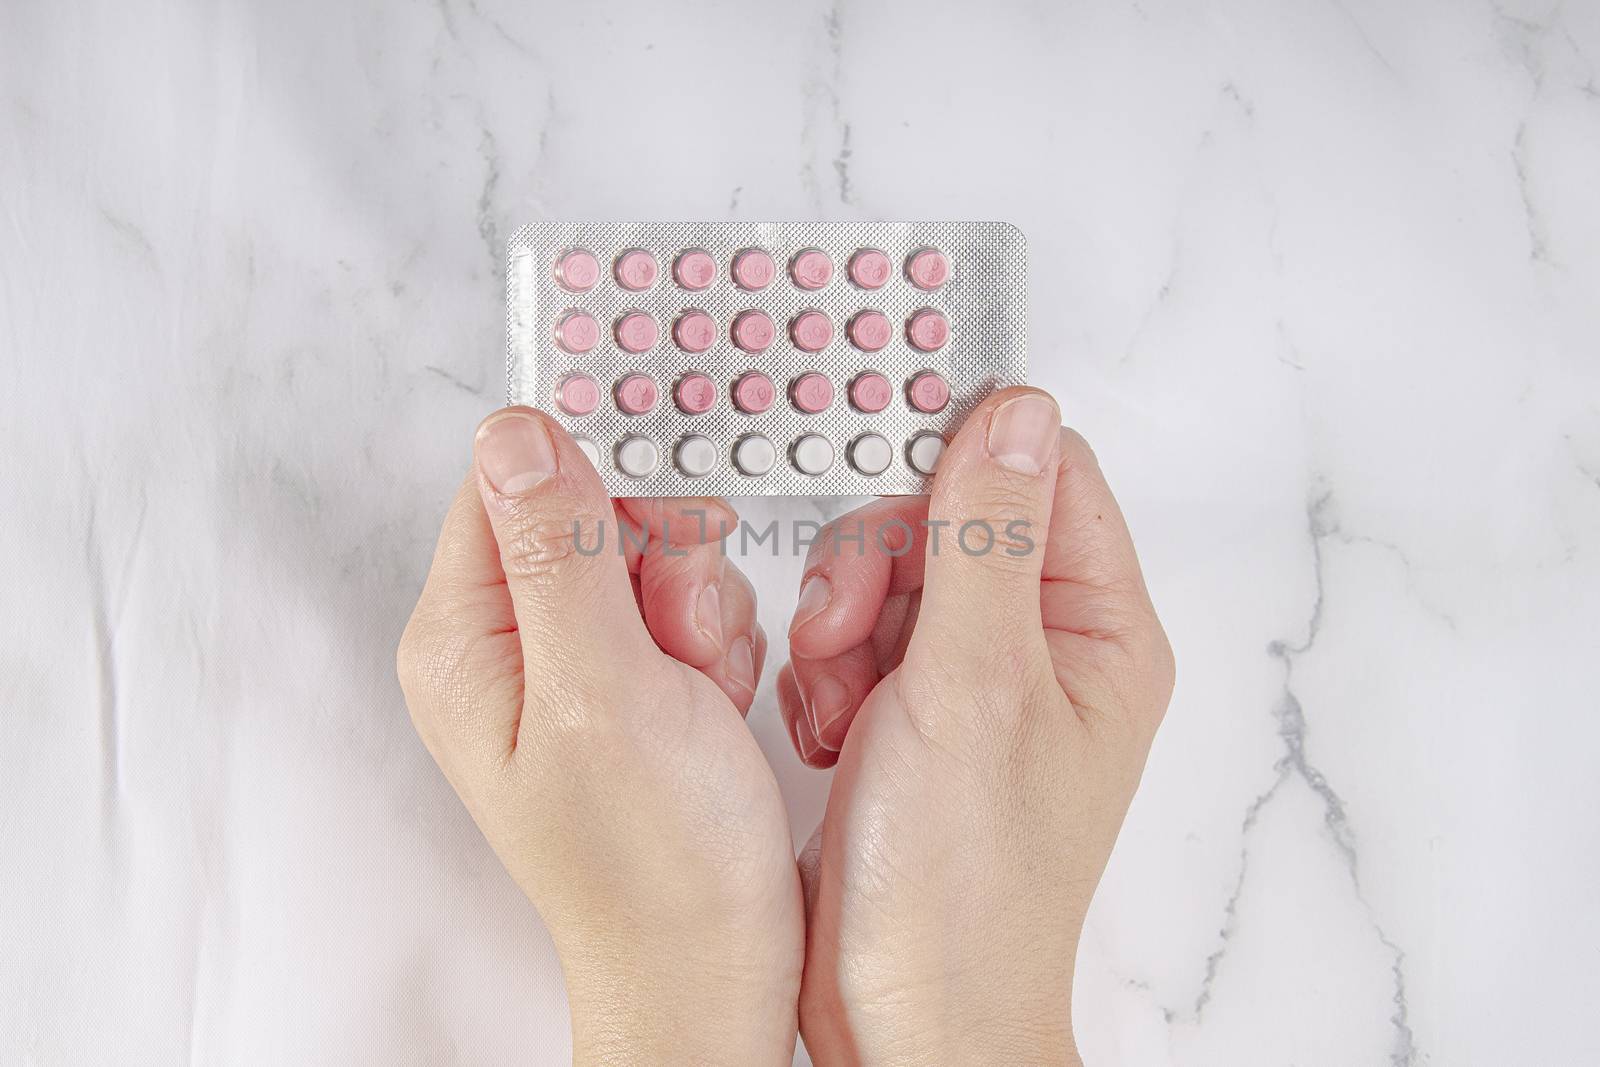 Female hands holding birth control pills on a marble background by oasisamuel